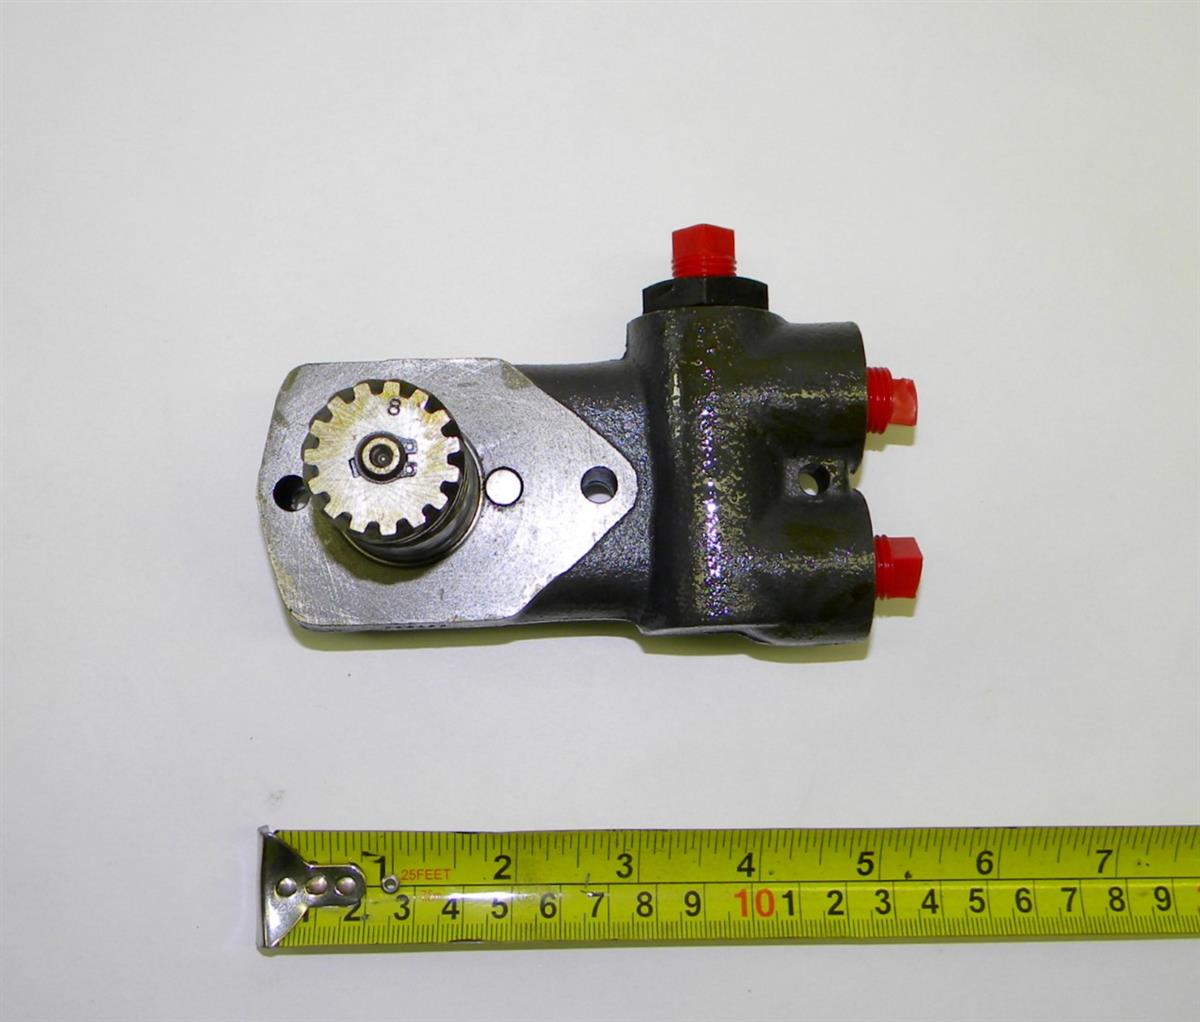 COM-5200 | 2910-00-871-5428 Multi-Fuel Injection Pump Gear Assembly for M35A2 and M54. NOS.  (2).JPG